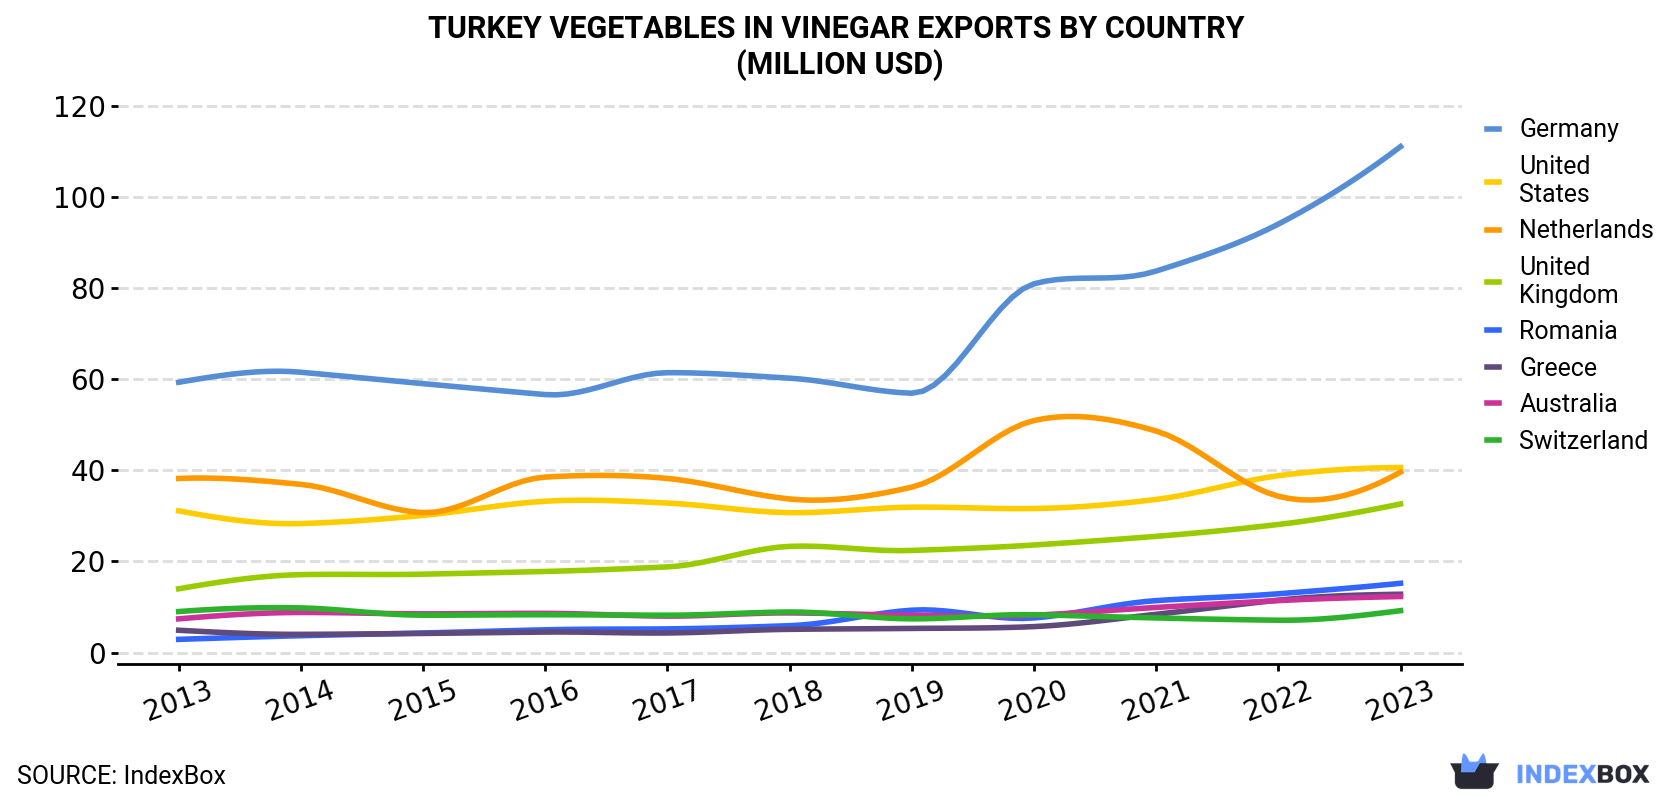 Turkey Vegetables In Vinegar Exports By Country (Million USD)